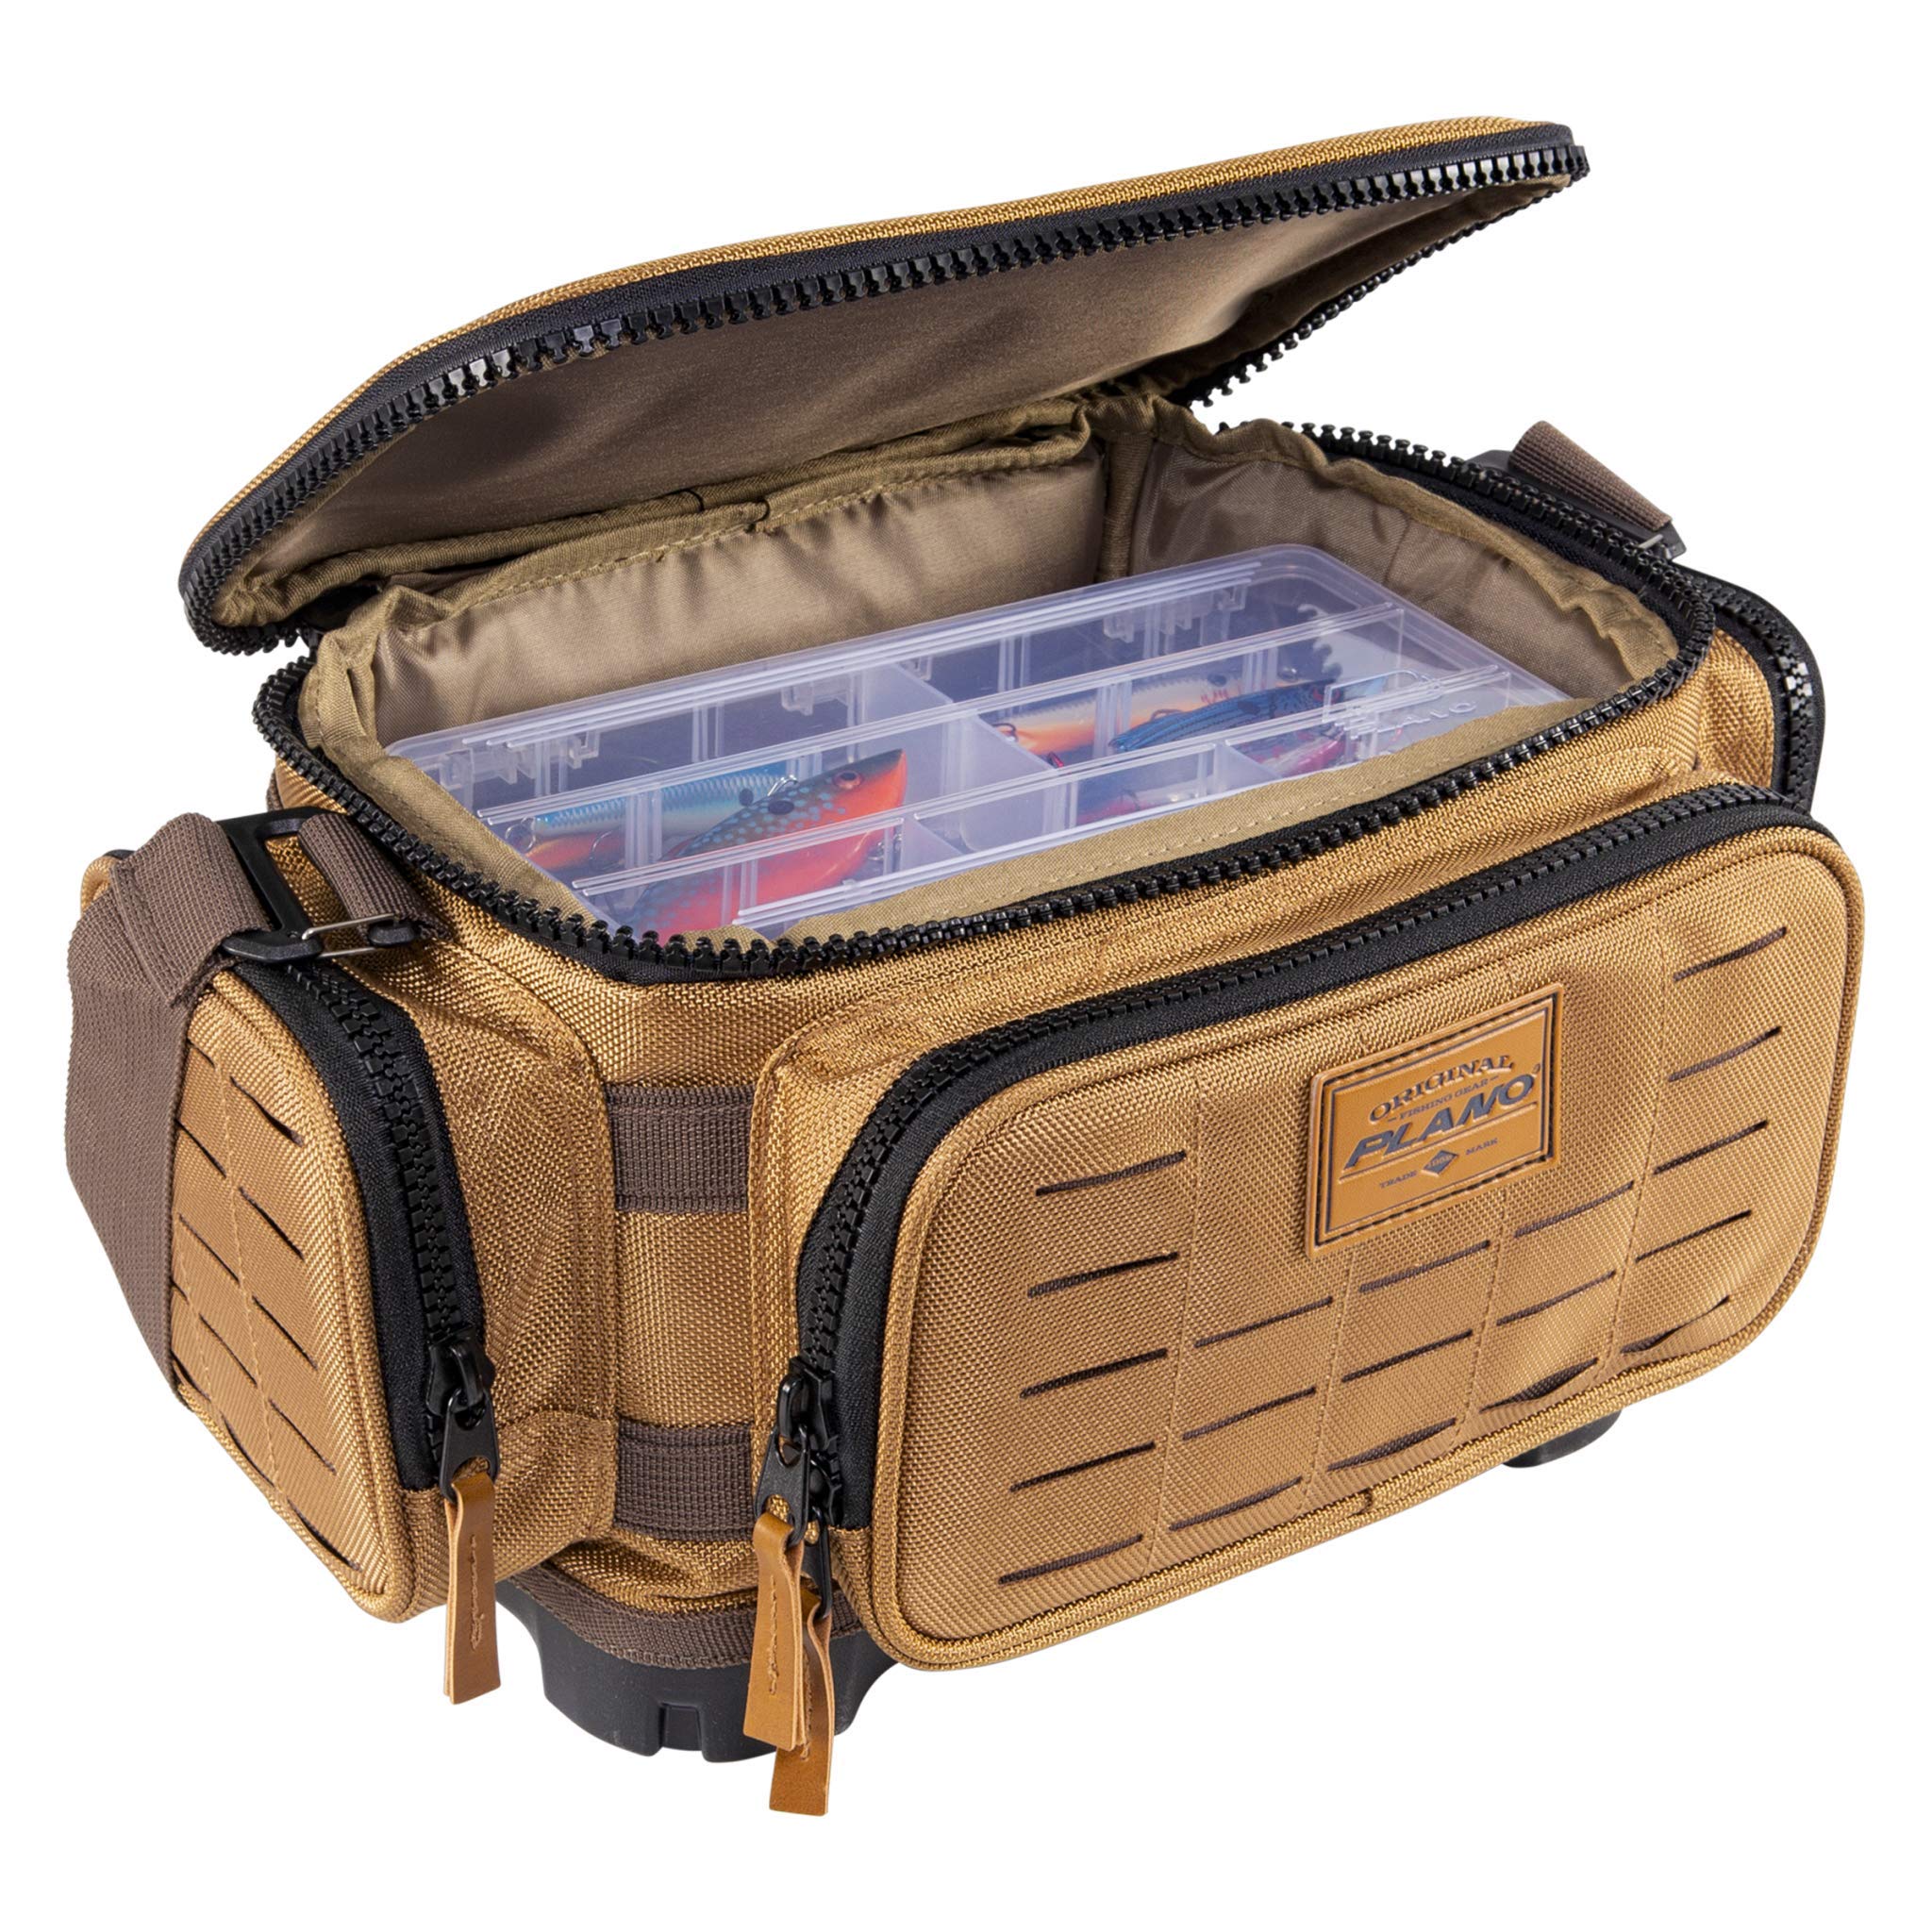 Plano Guide Series 3500 Tackle Bag, Beige, Includes 5 3500